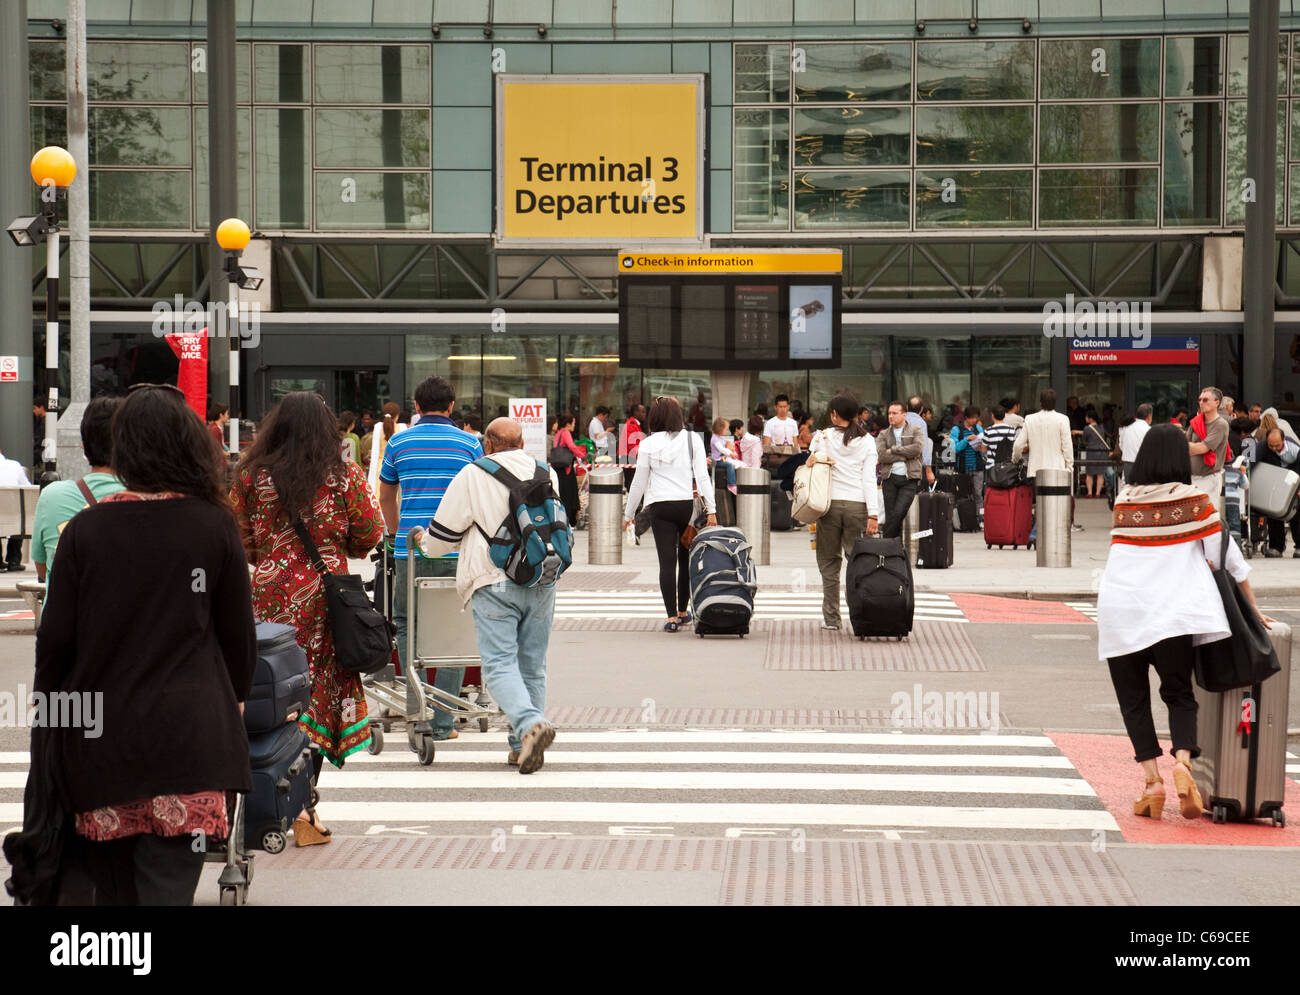 Passengers at the entrance to terminal 3, Heathrow airport London UK Stock Photo